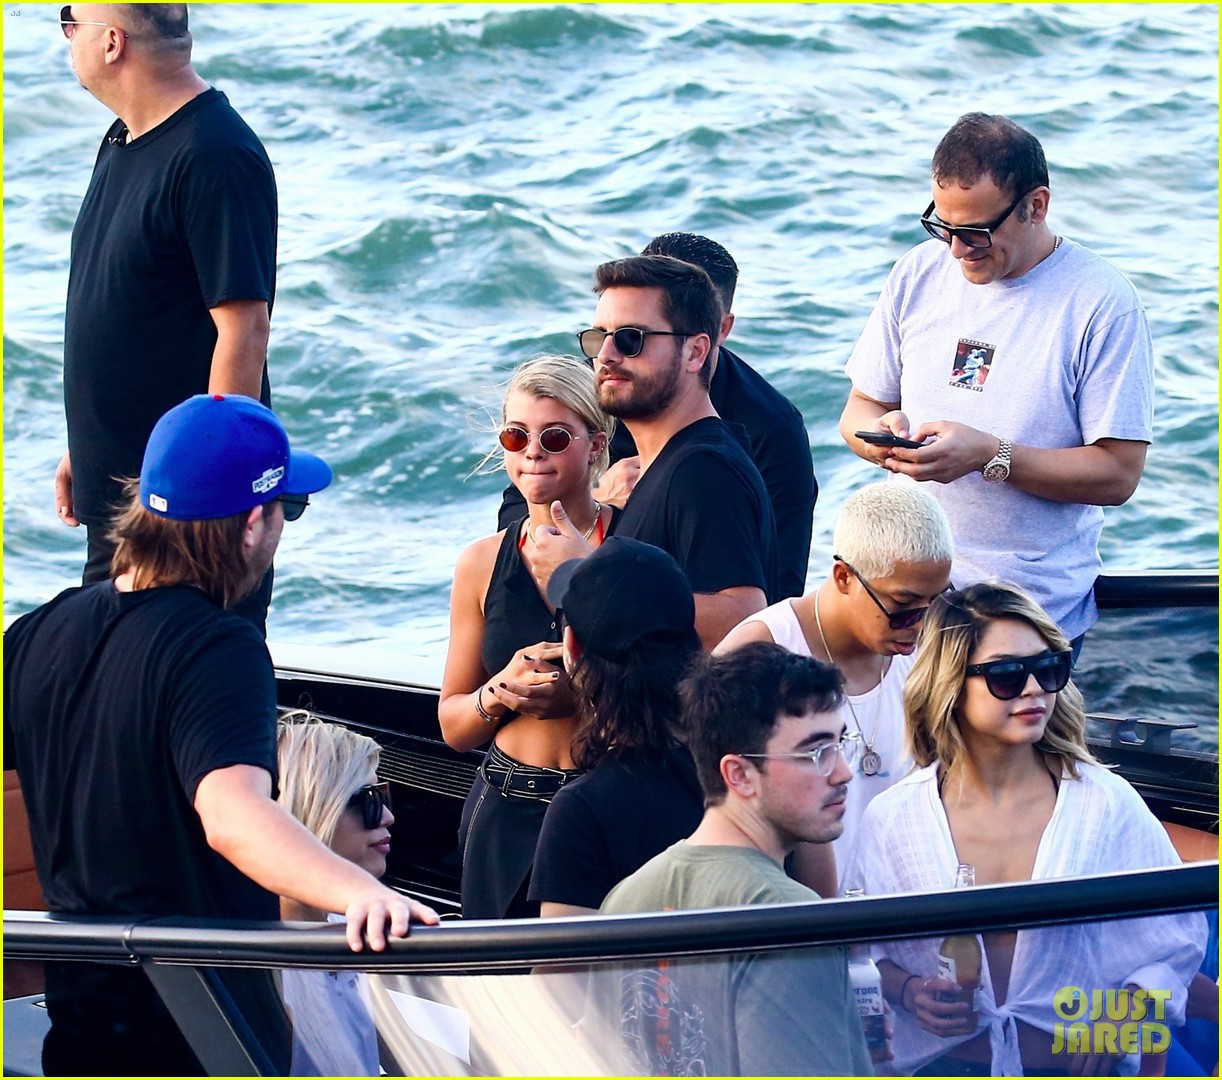 scott disick and sofia richie flaunt pda on a boat with friends2 36